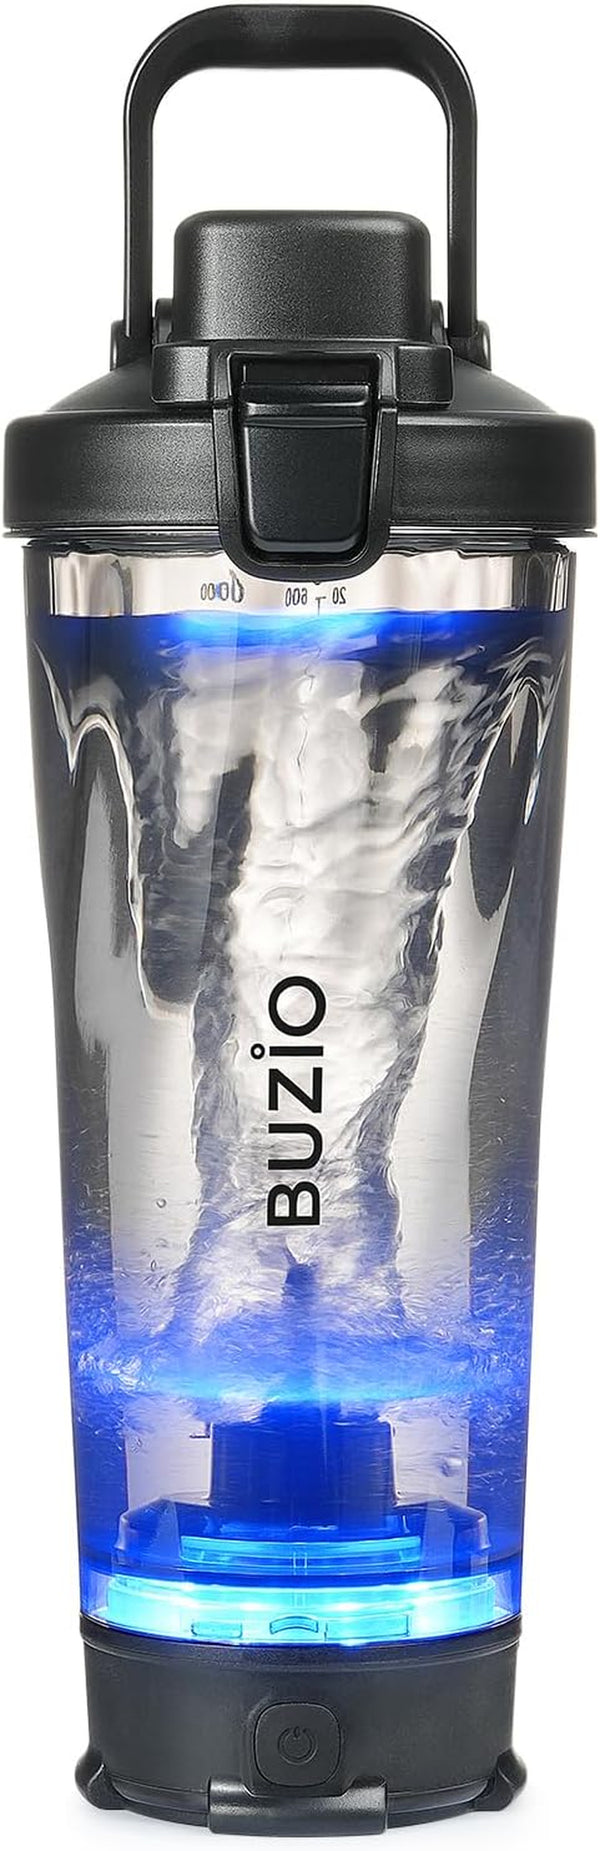 BUZIO Electric Protein Shaker Bottle, 24 oz Shake Blender Bottle, USB Rechargeable Blender Bottles for Protein Mixes Shaker Cups, Portable Large Sports Water Bottles Made with Tritan, Black